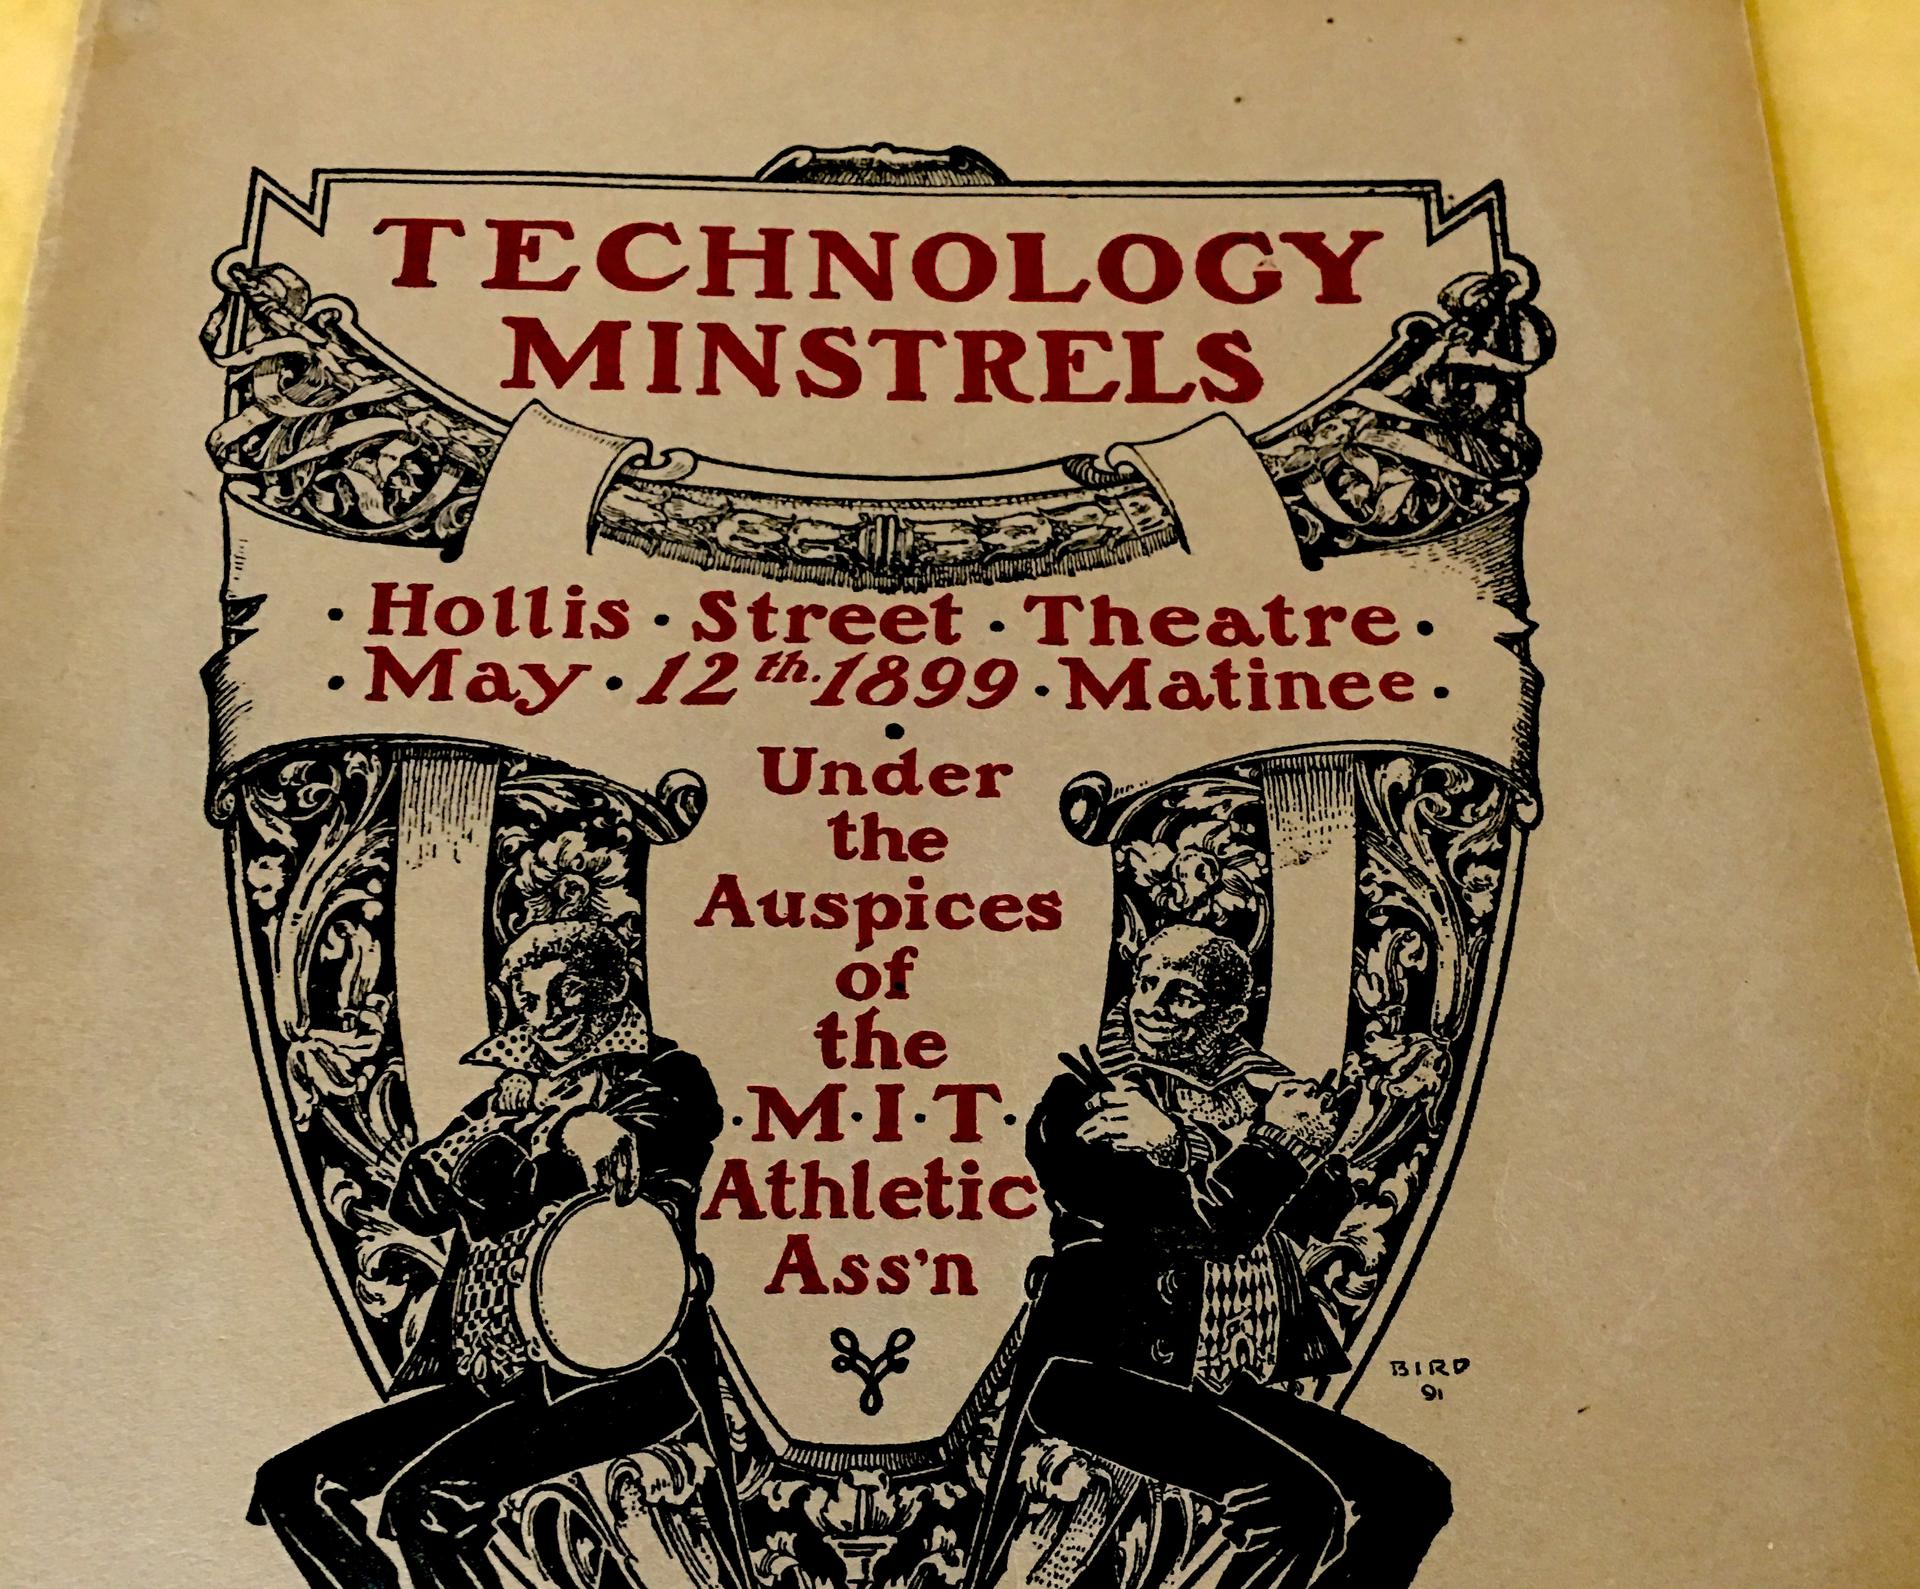 A program from a minstrel show put on by the MIT Athletic Association in 1899.